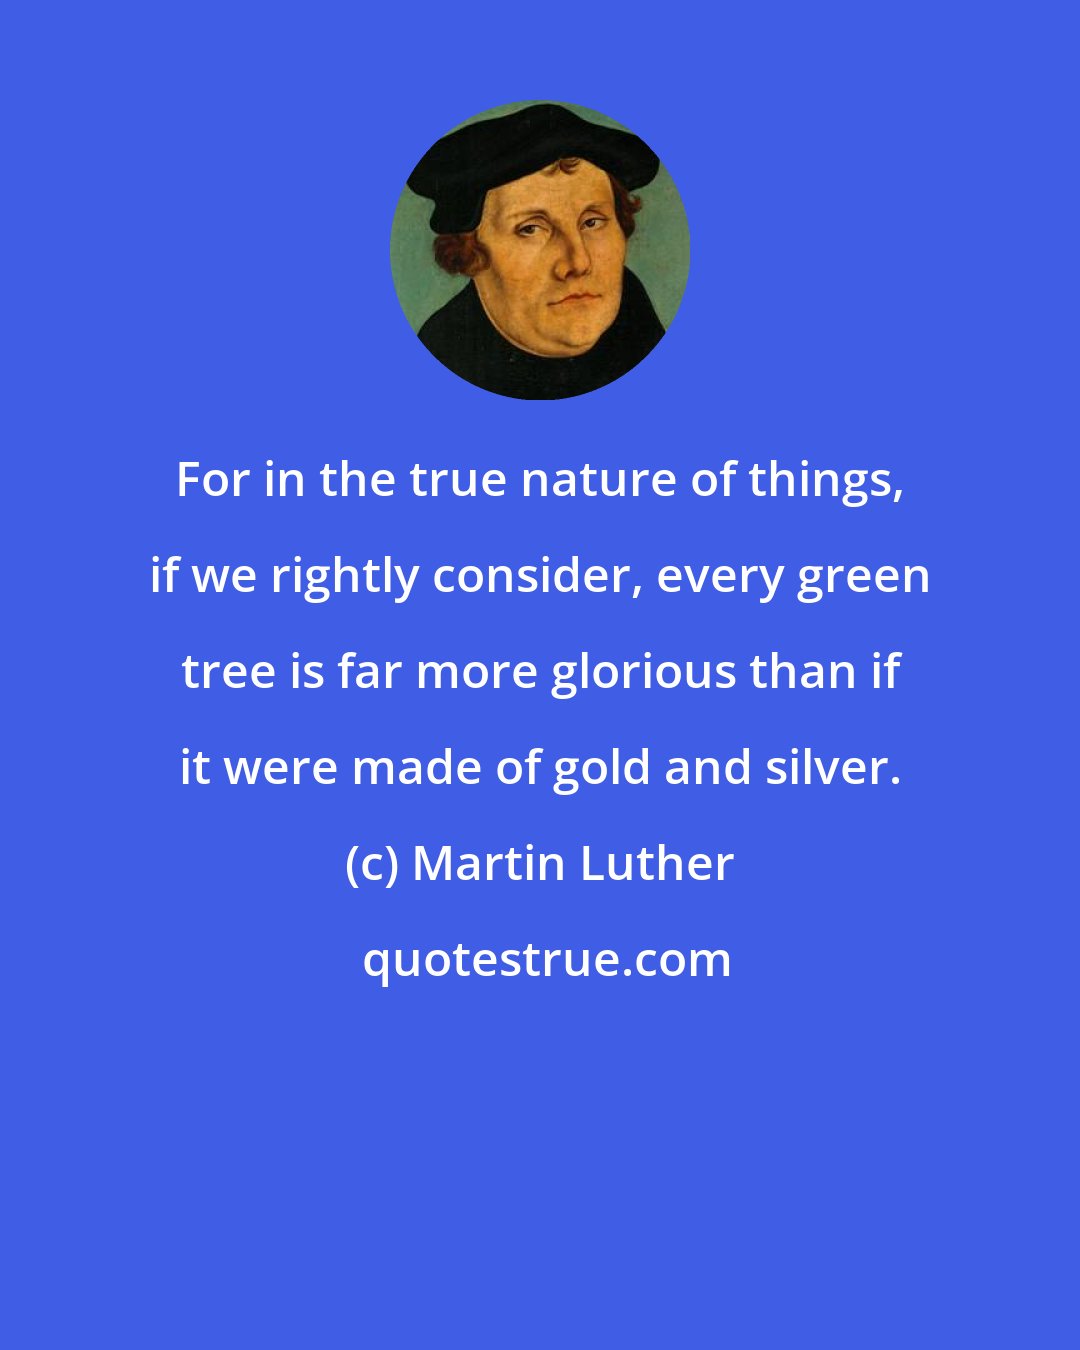 Martin Luther: For in the true nature of things, if we rightly consider, every green tree is far more glorious than if it were made of gold and silver.